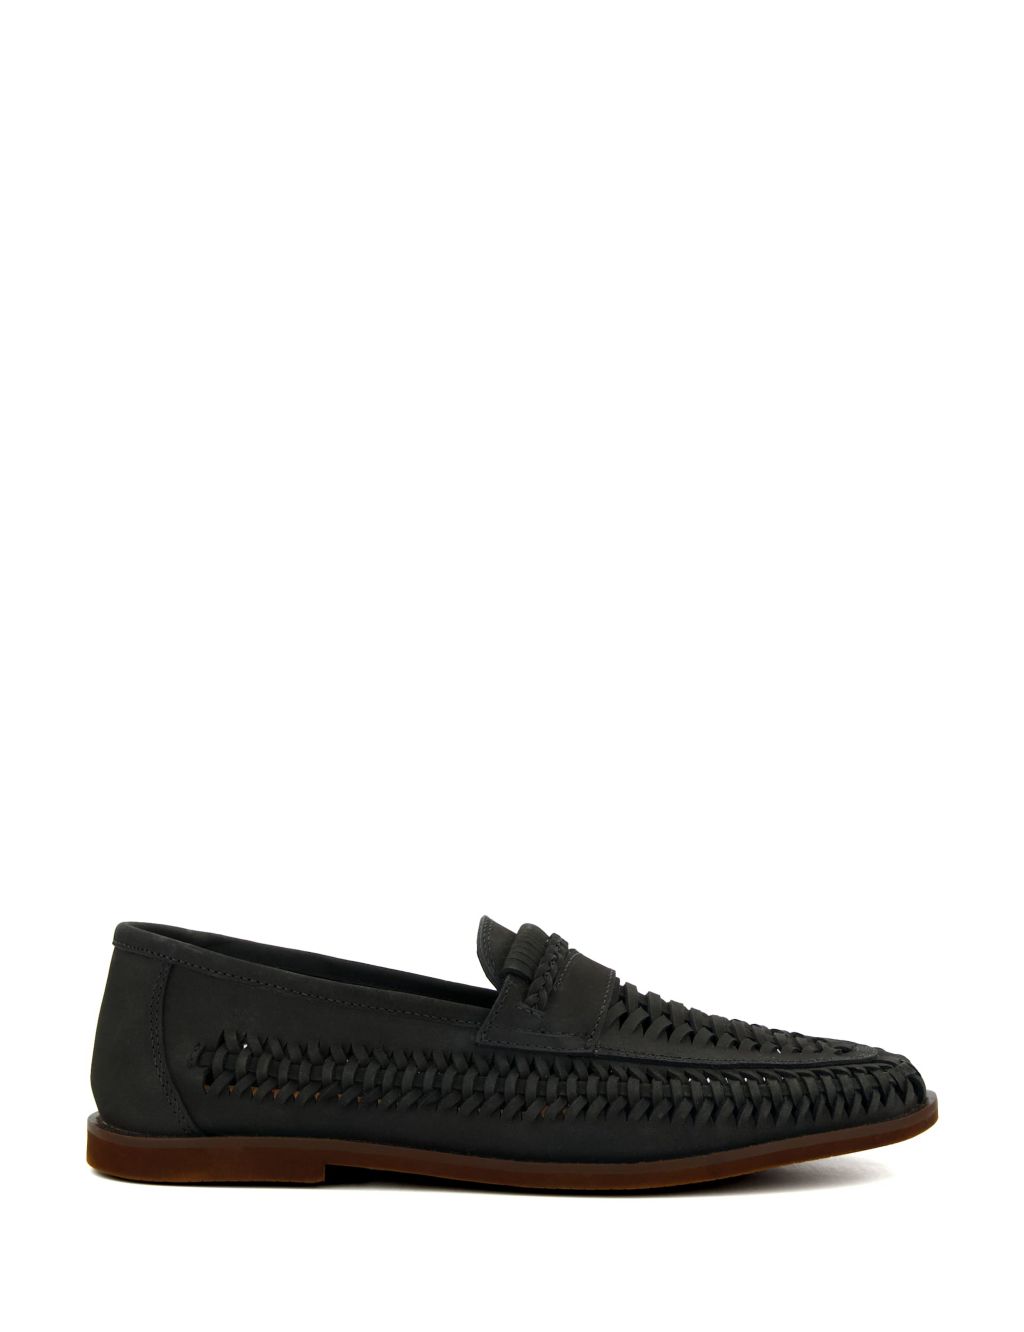 Leather Woven Flat Loafers image 1